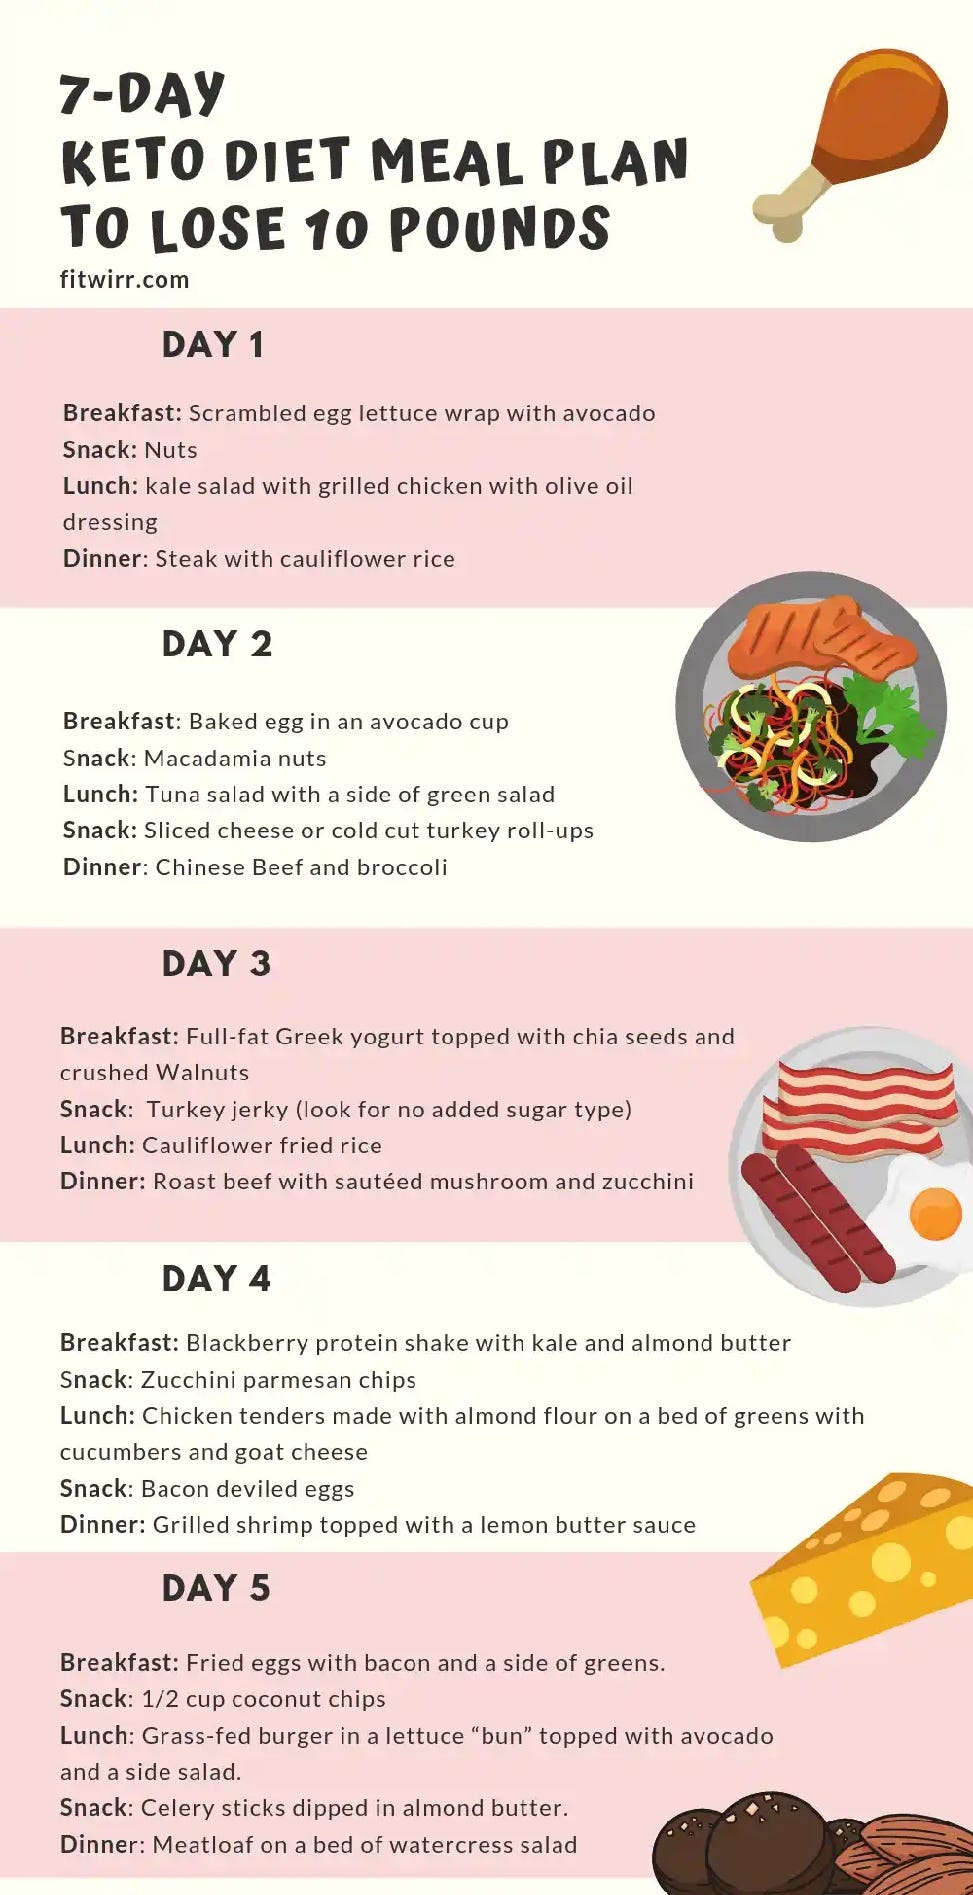 How To Lose Fat For Just $5/Day (7-Day Cheap Weight Loss Meal Plan)